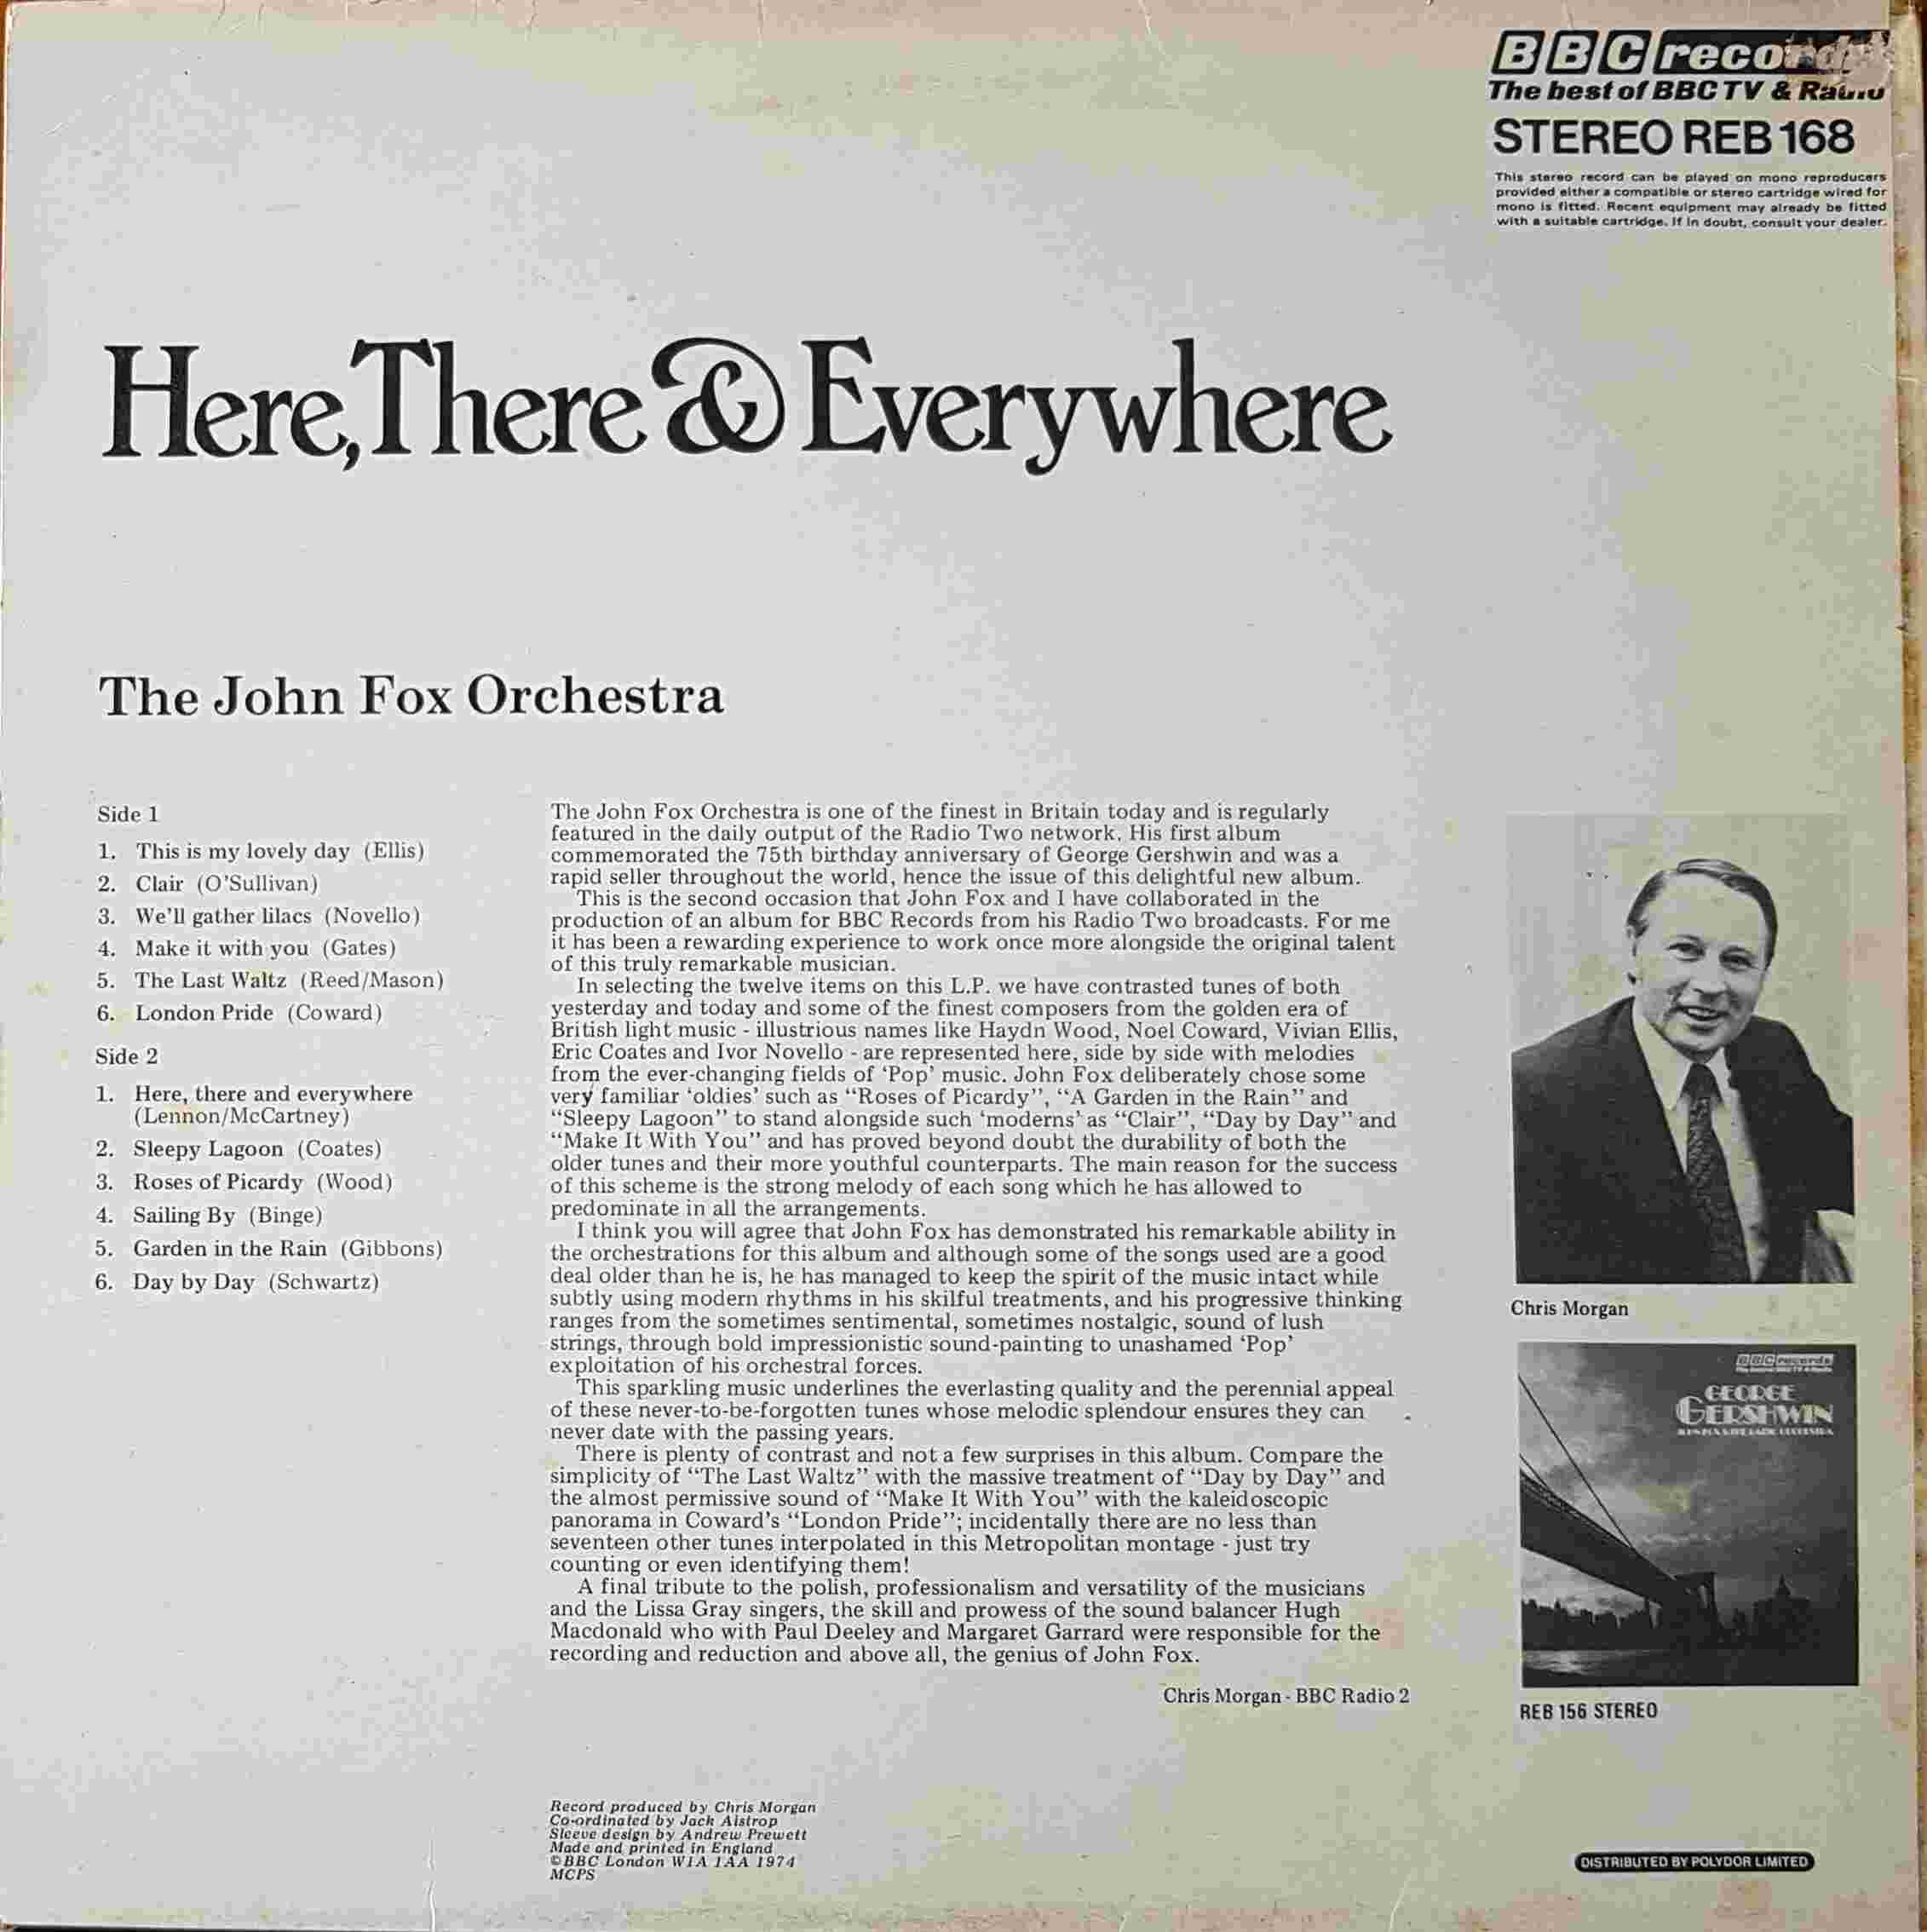 Picture of REB 168 Here there and everywhere - John Fox Orchestra by artist John Fox from the BBC records and Tapes library